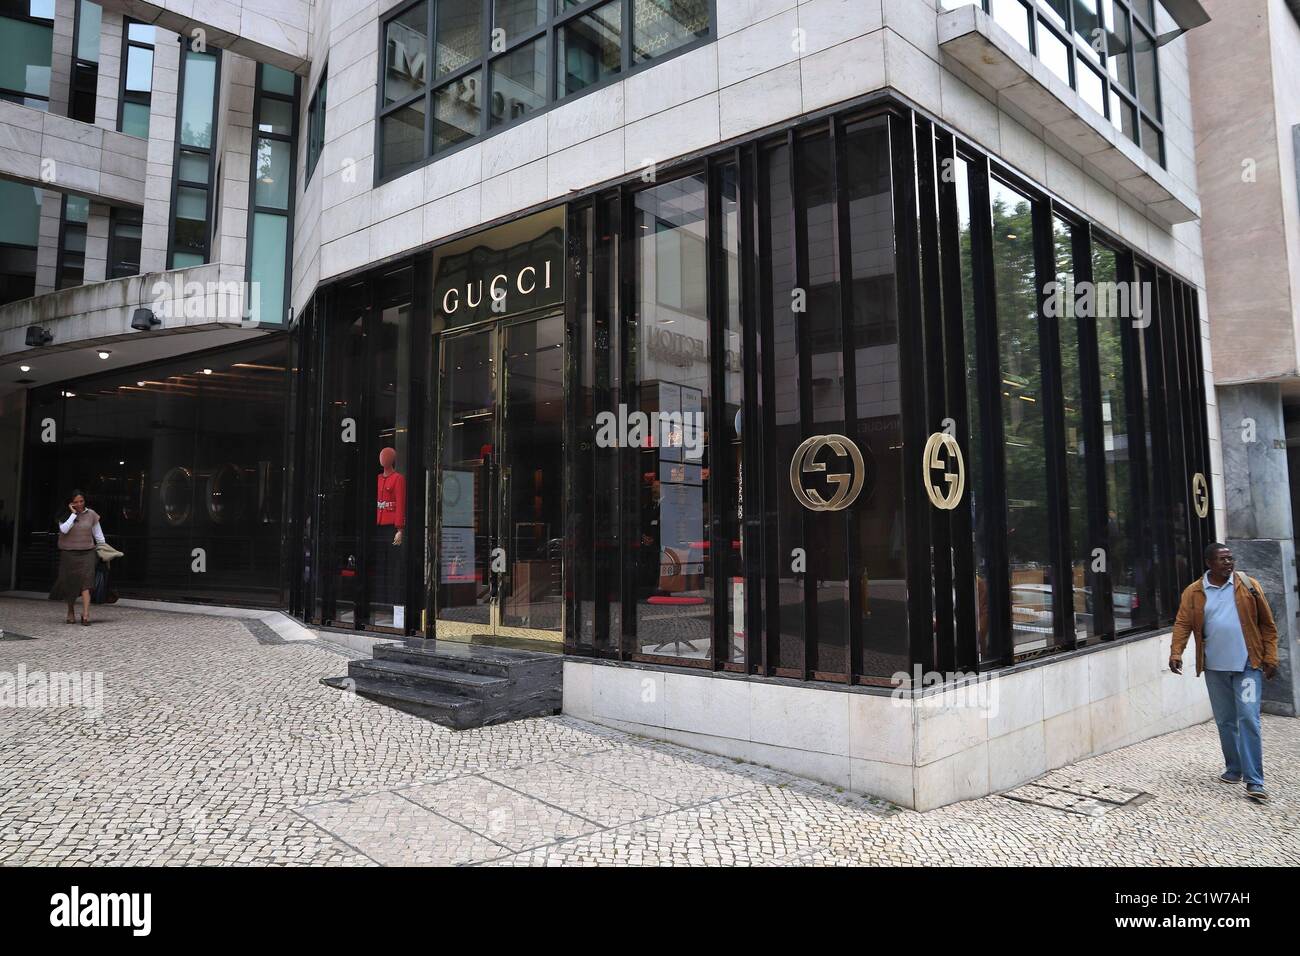 Goed verhaal tumor LISBON, PORTUGAL - JUNE 6, 2018: Gucci fashion shop at Avenida da Liberdade  in Lisbon. This famous boulevard is renowned for luxury brand shopping and  Stock Photo - Alamy